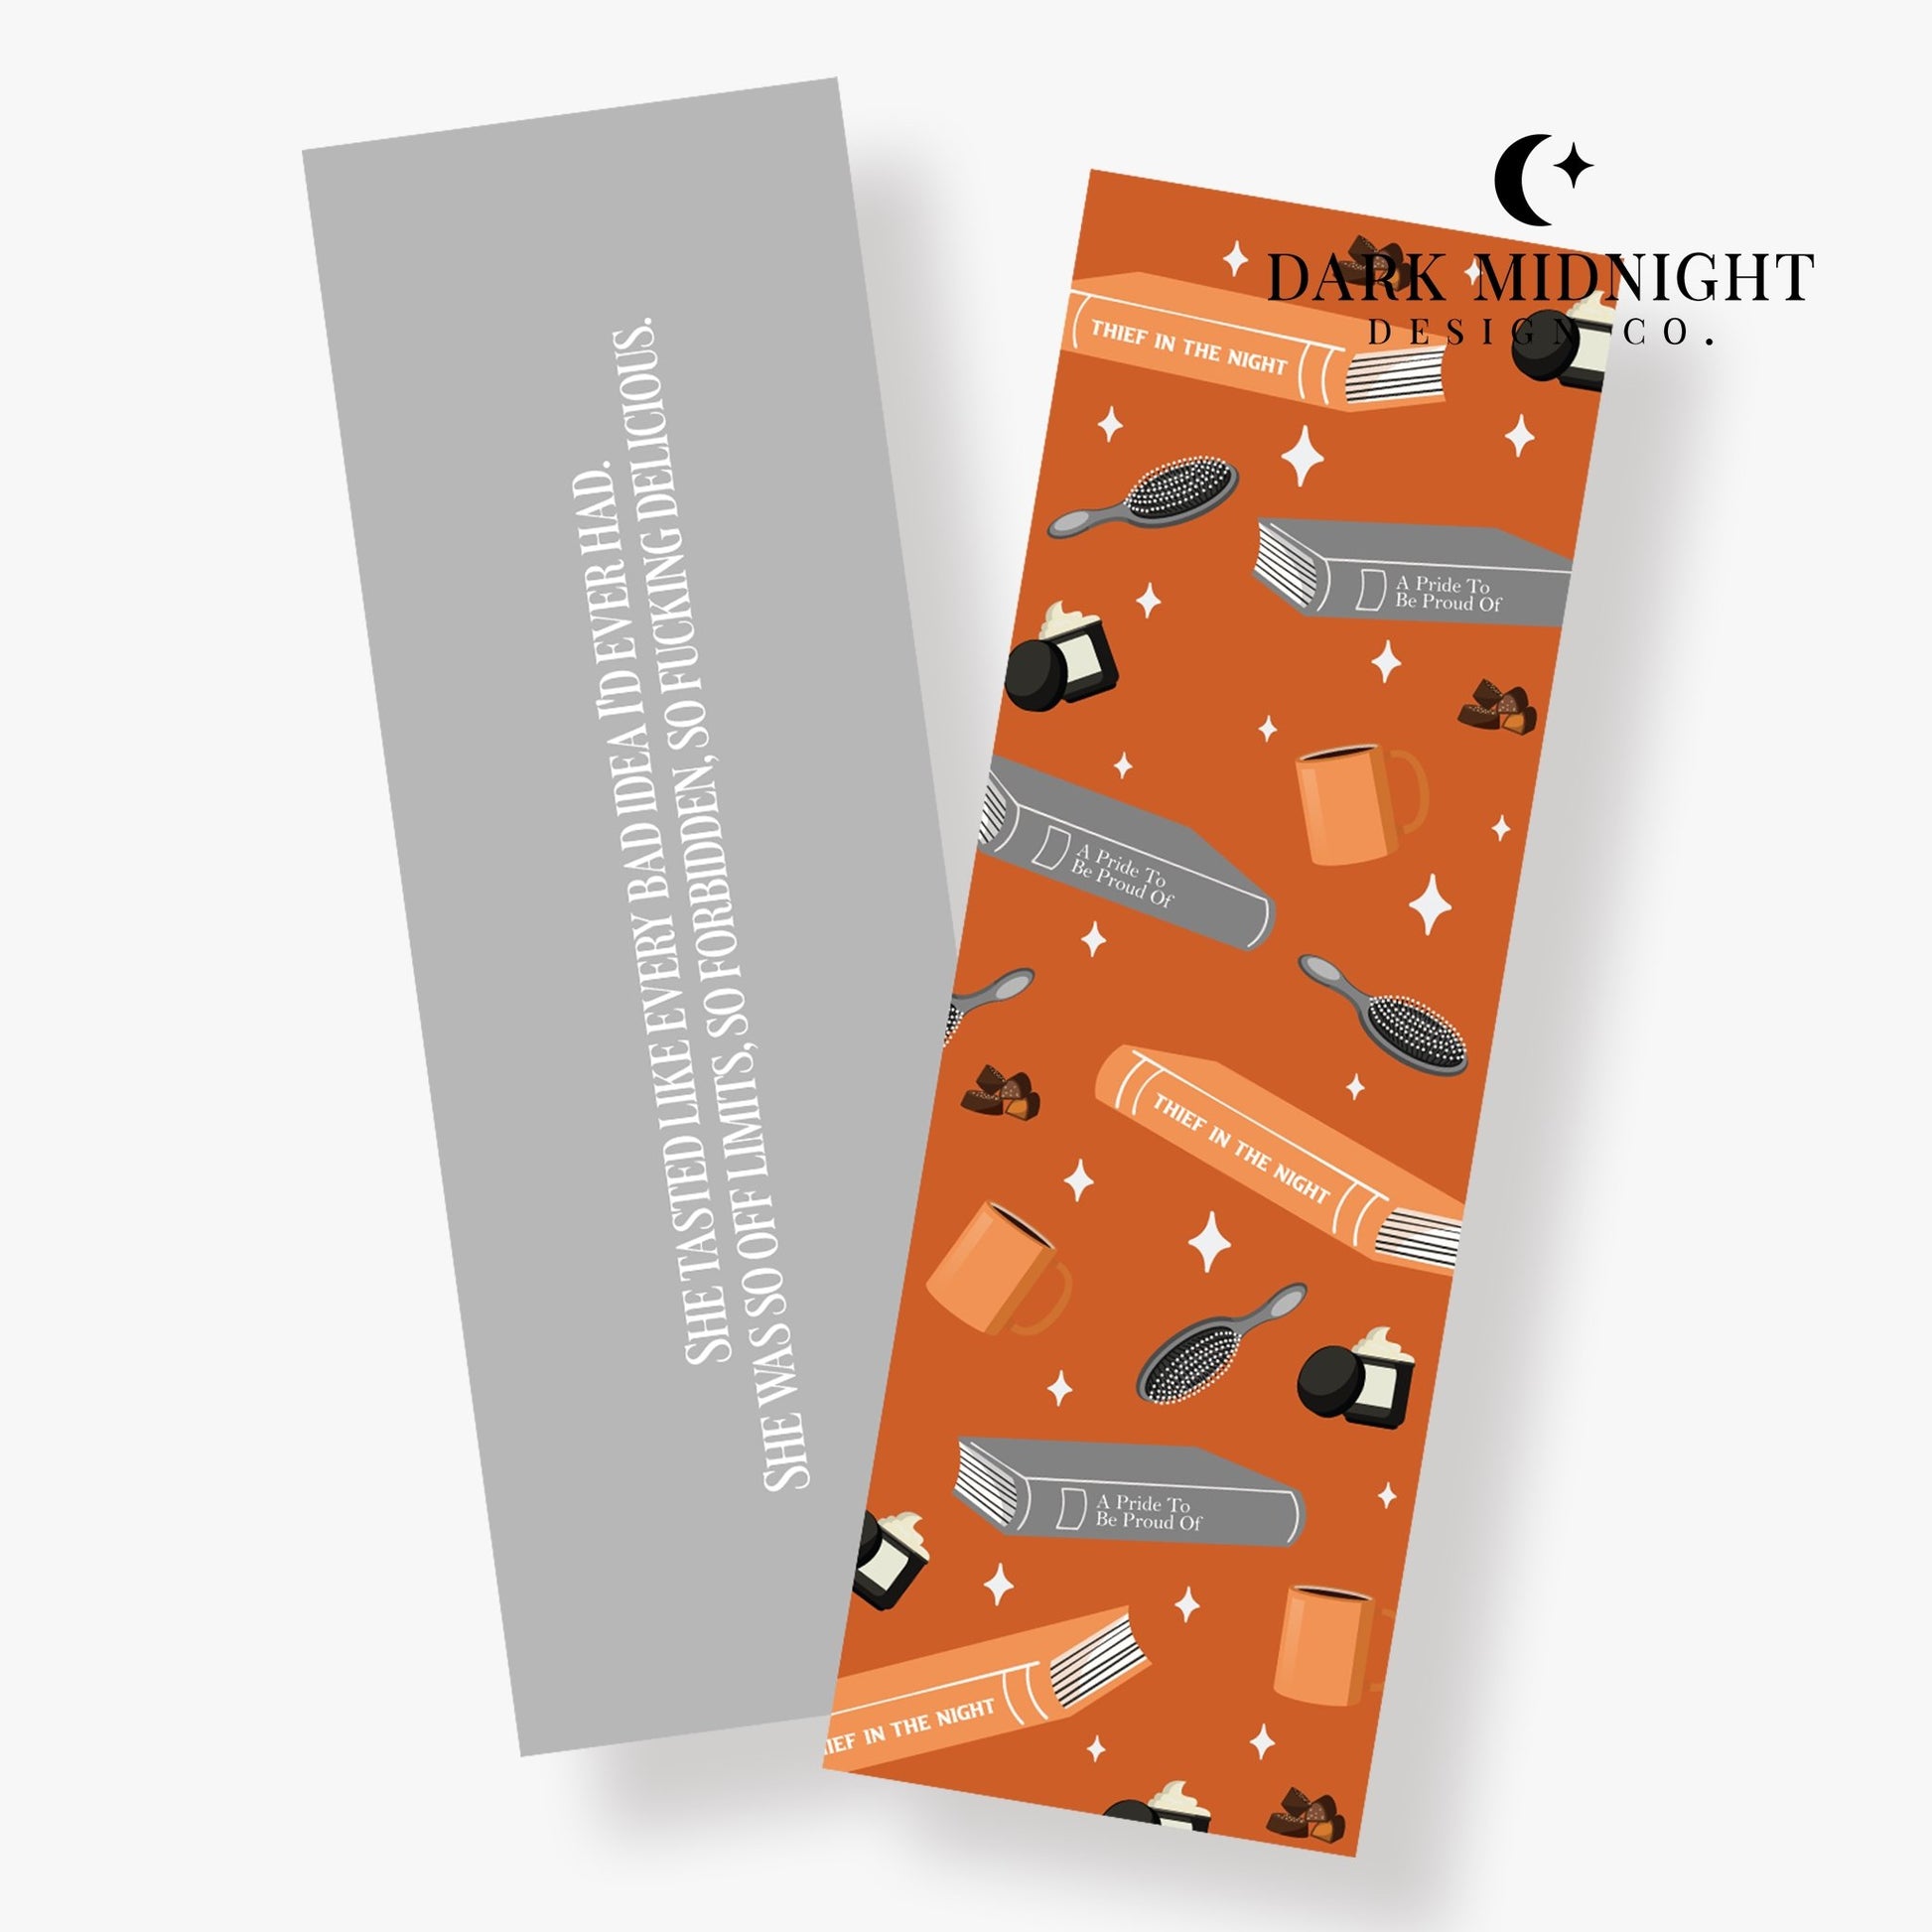 Character Anthology Bookmark - Roary Night - Officially Licensed Darkmore Penitentiary Bookmark - Dark Midnight Design Co